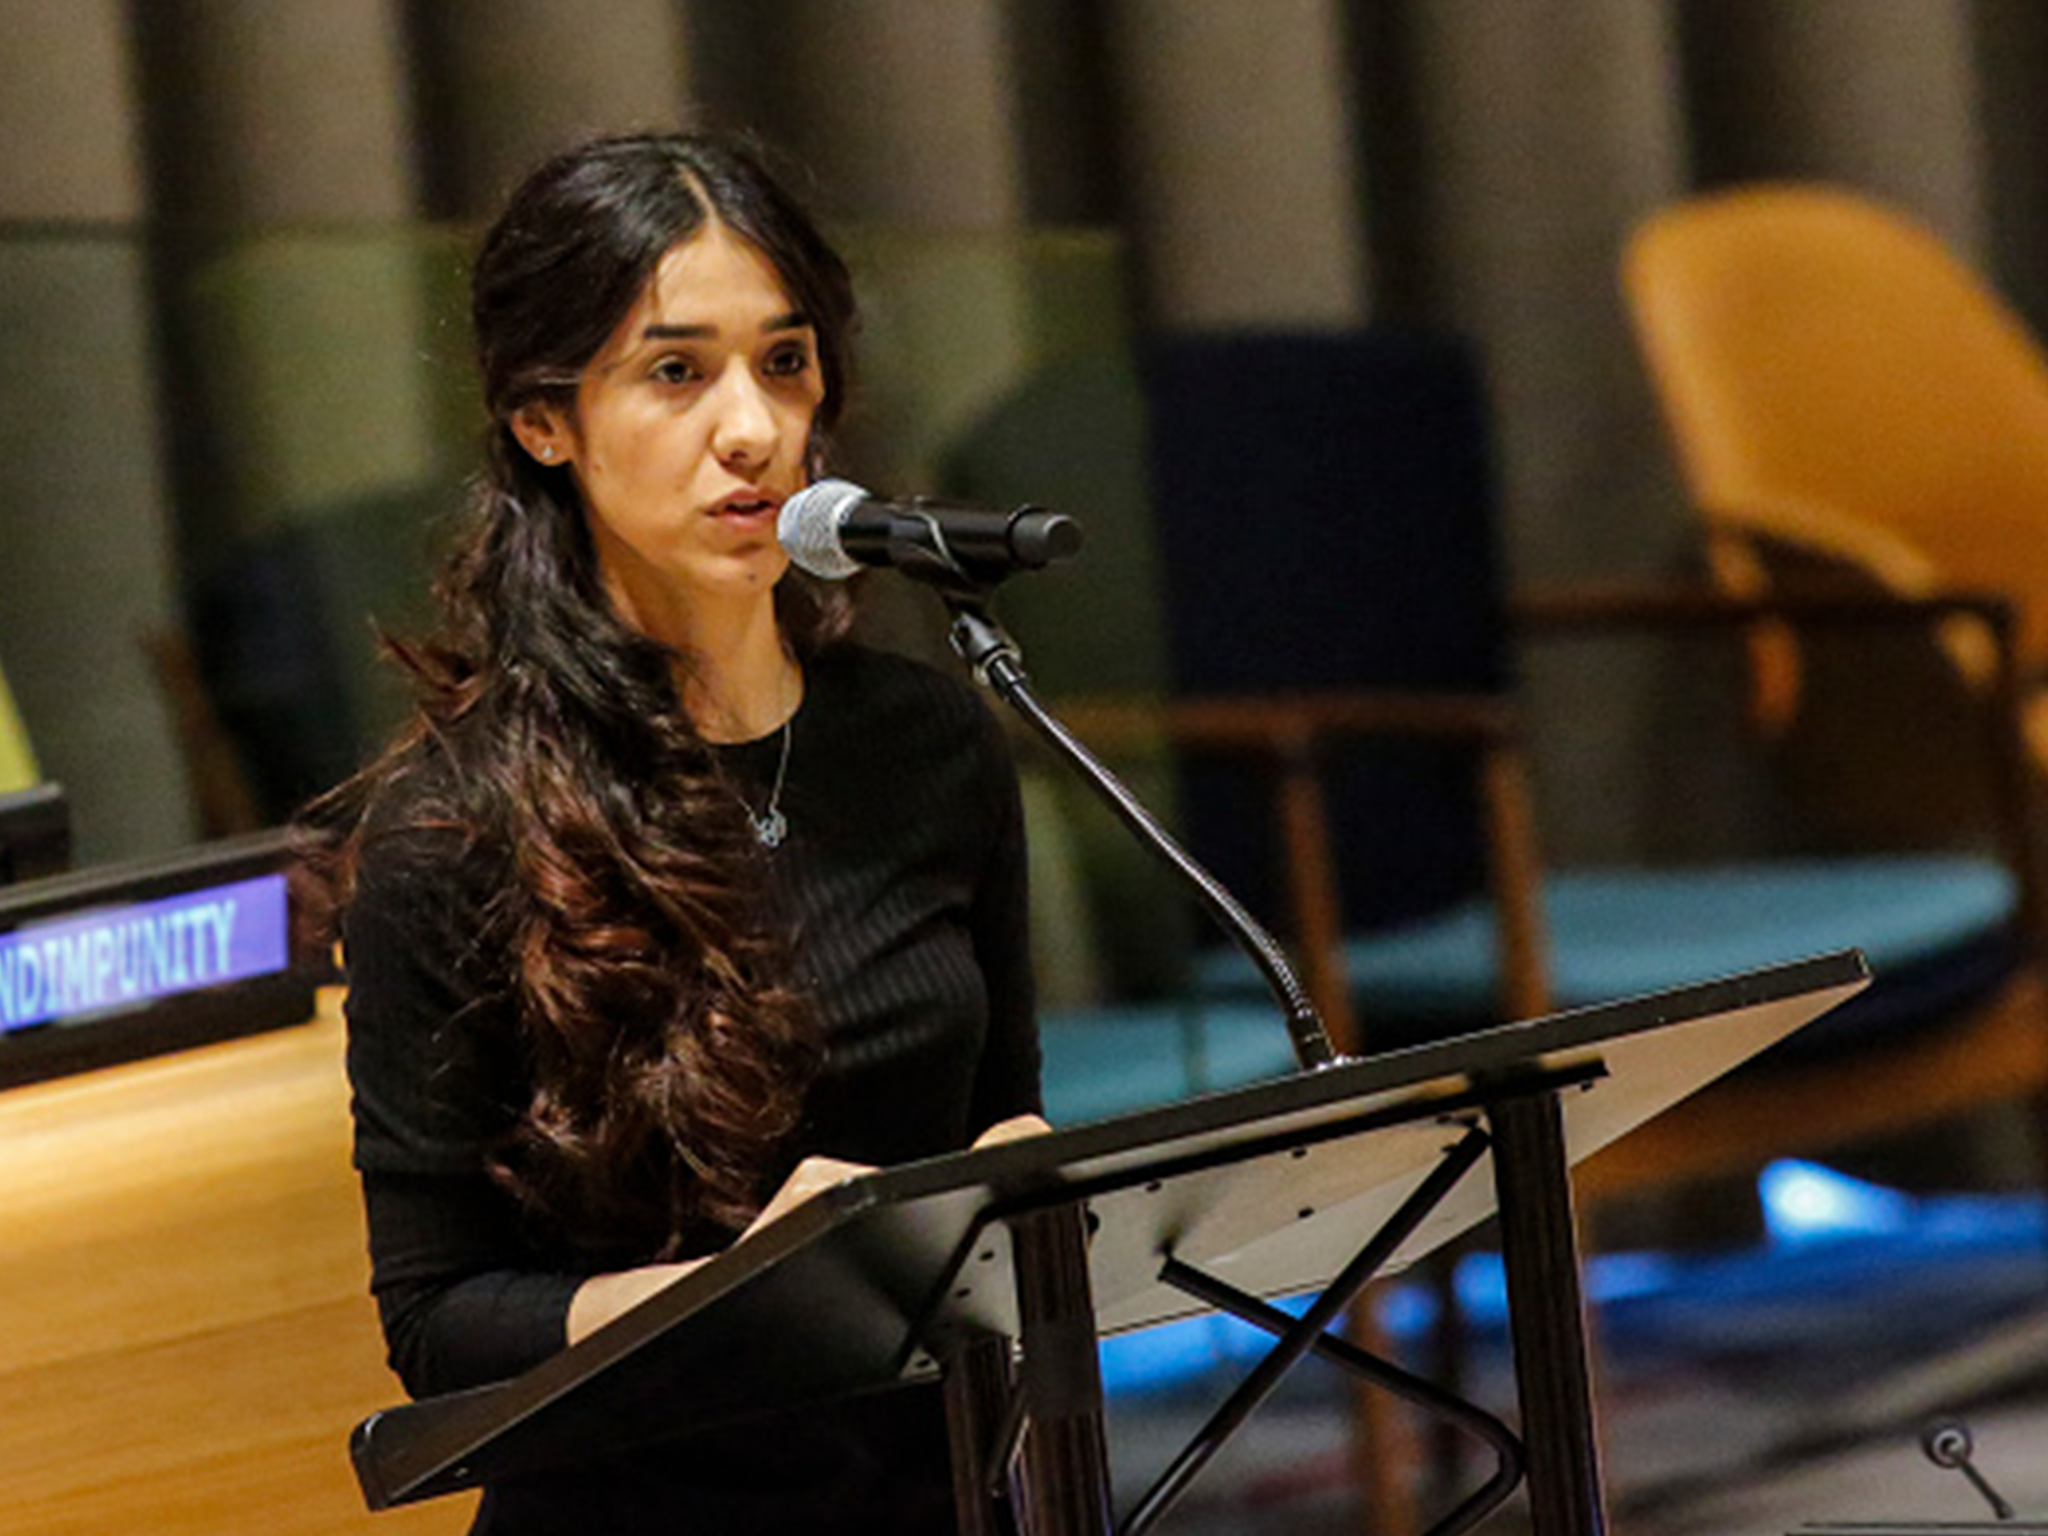 Yazidi human rights activist Nadia Murad speaks as she attends at the United Nations